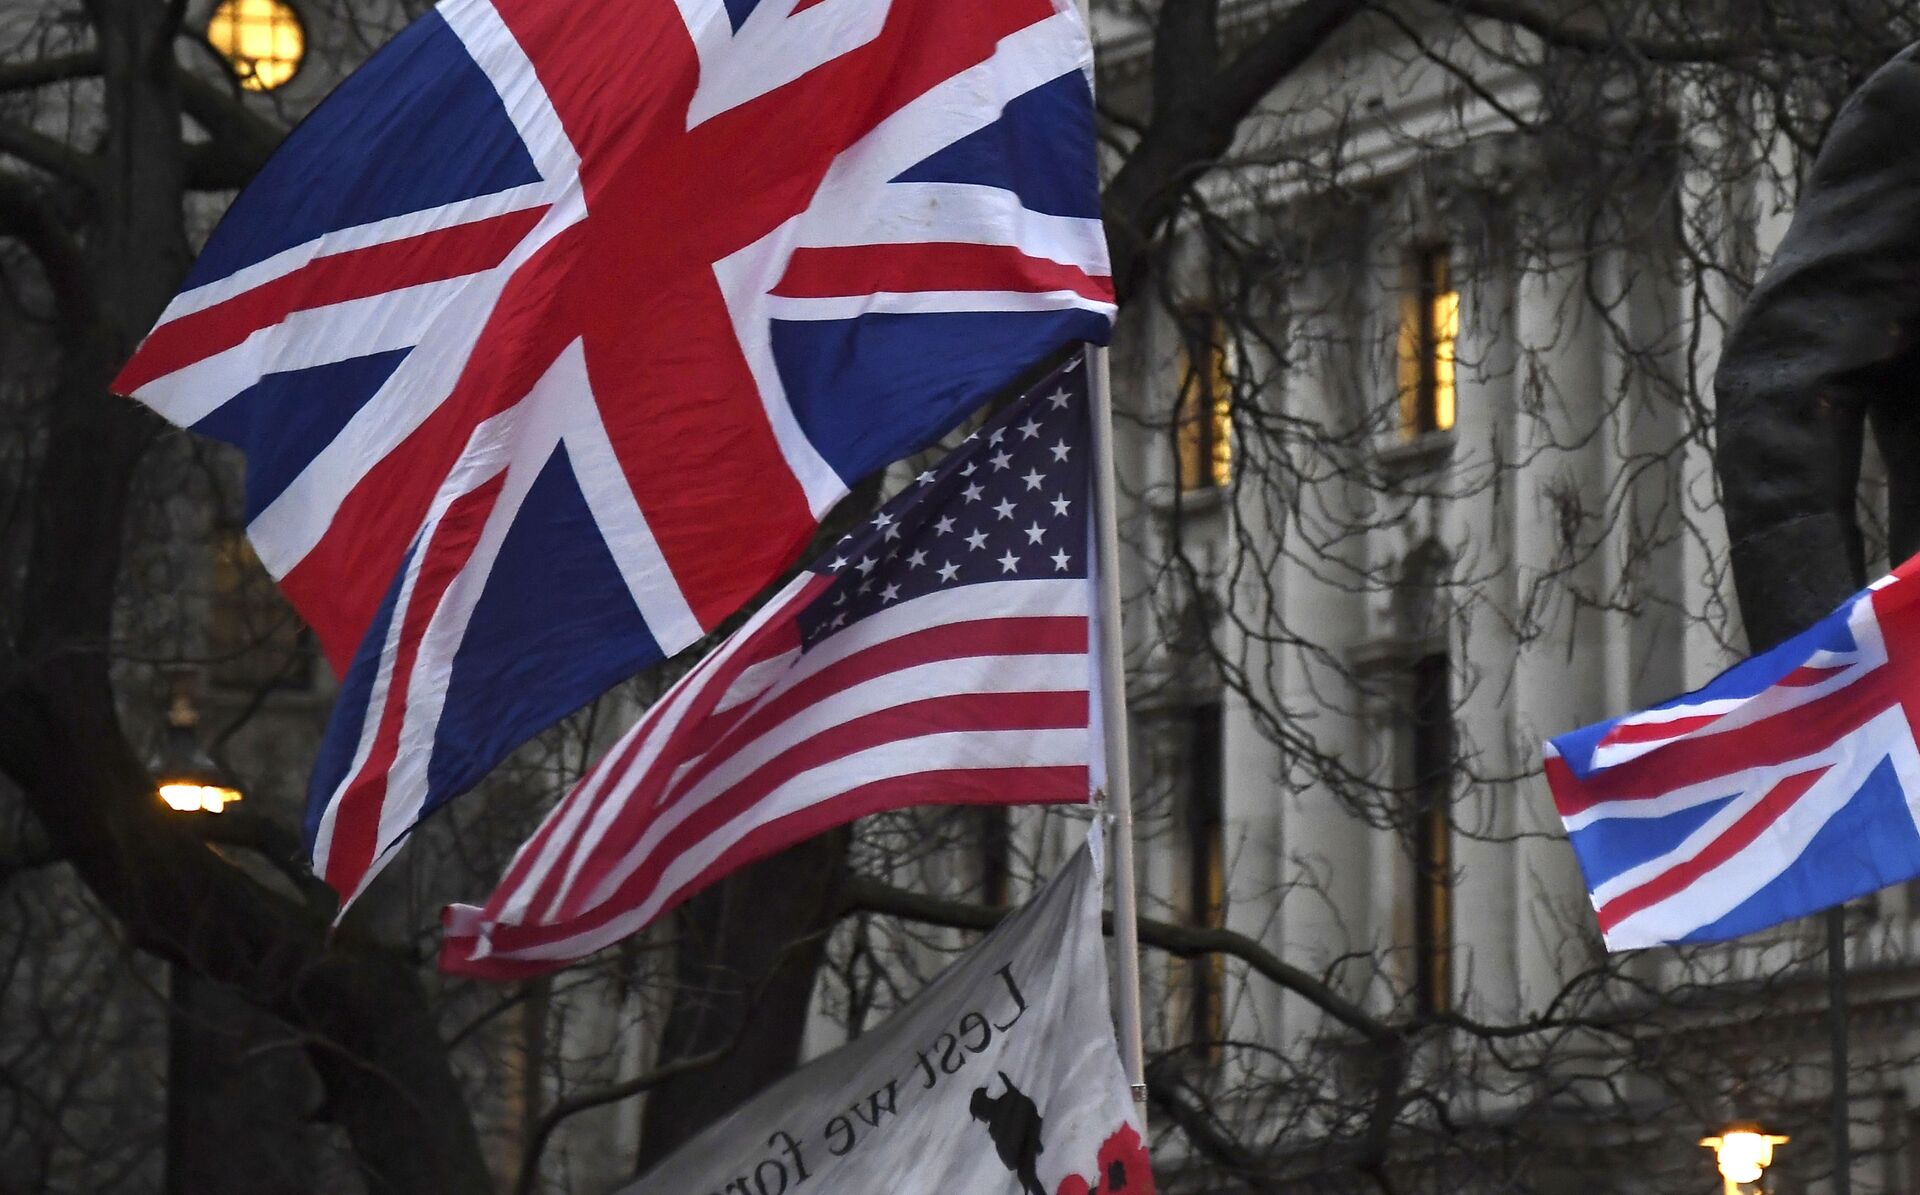  In this file photo dated Friday, Jan. 31, 2020, Brexit supporters hold British and US flags during a rally in London. - Sputnik International, 1920, 07.09.2021